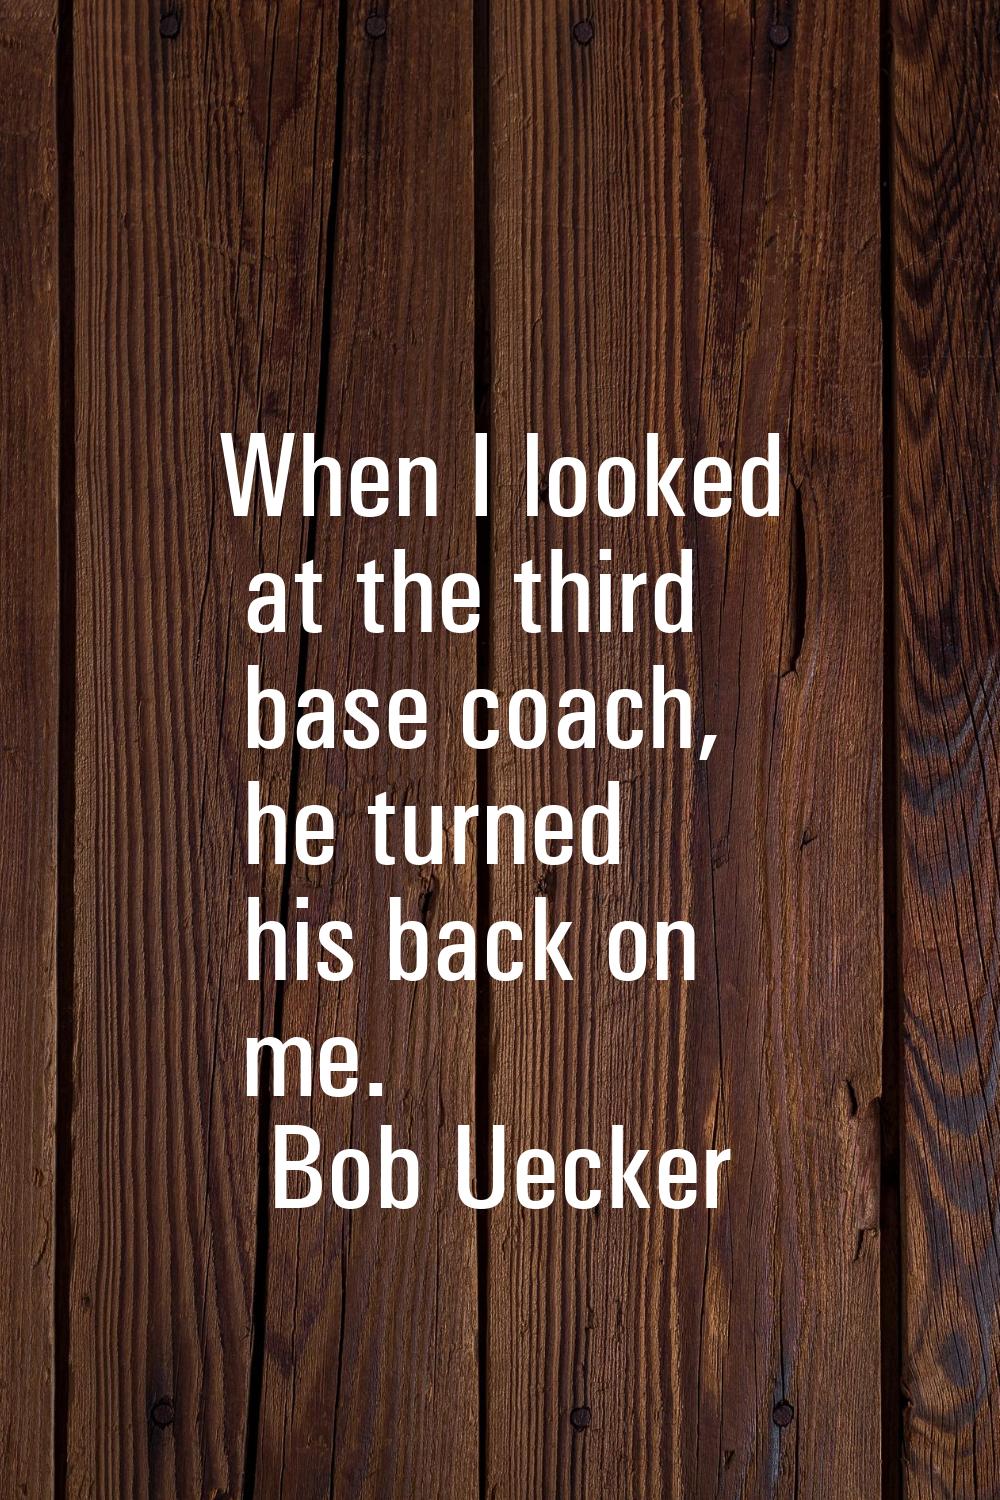 When I looked at the third base coach, he turned his back on me.